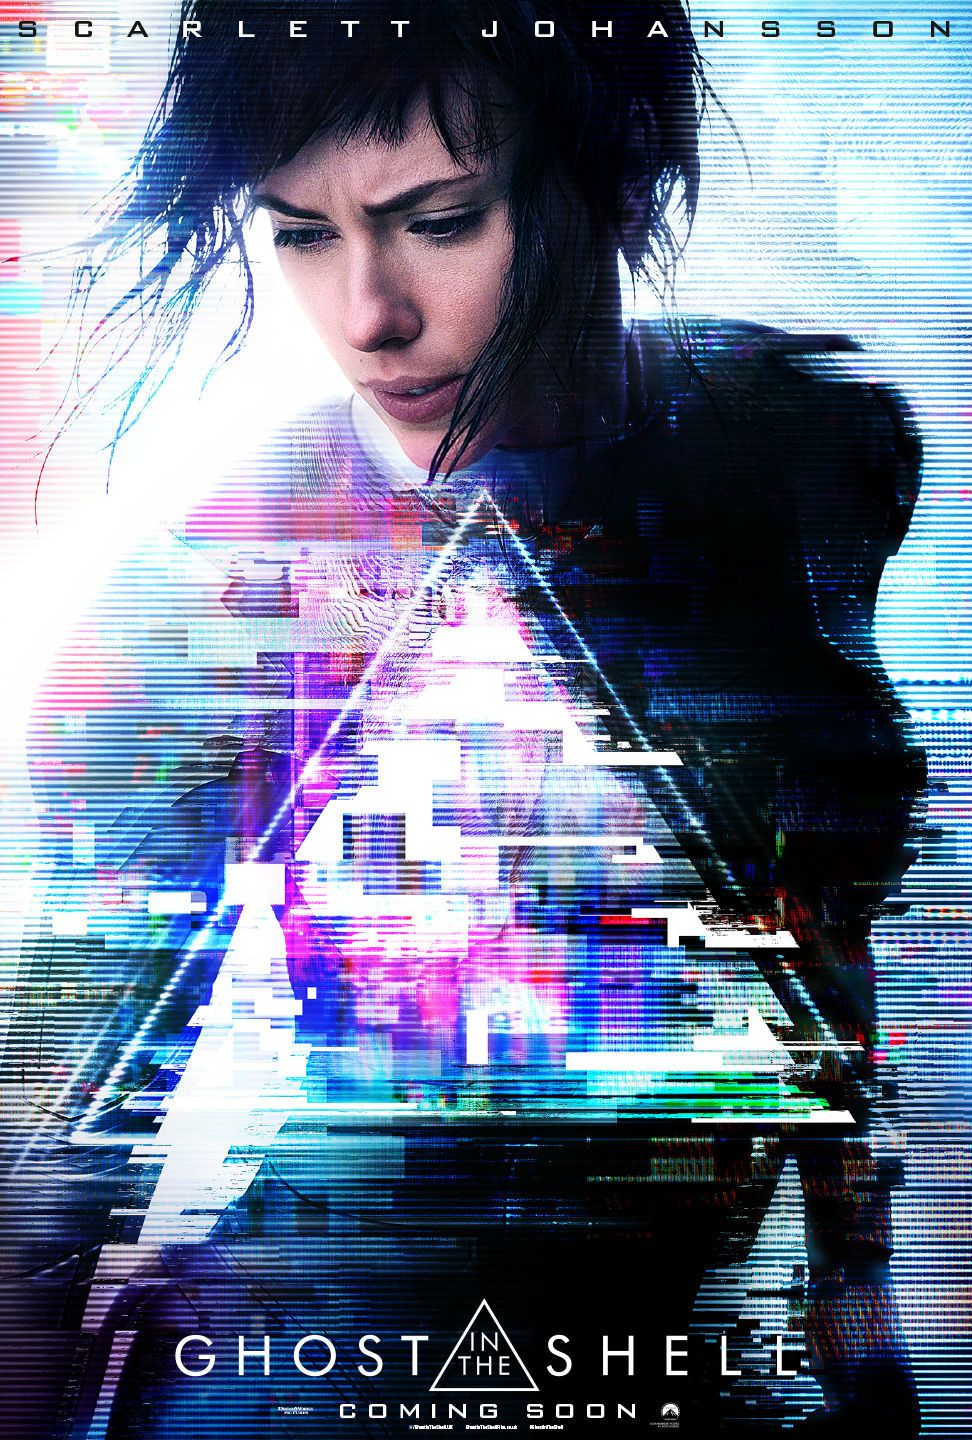 Ghost in the Shell International Poster